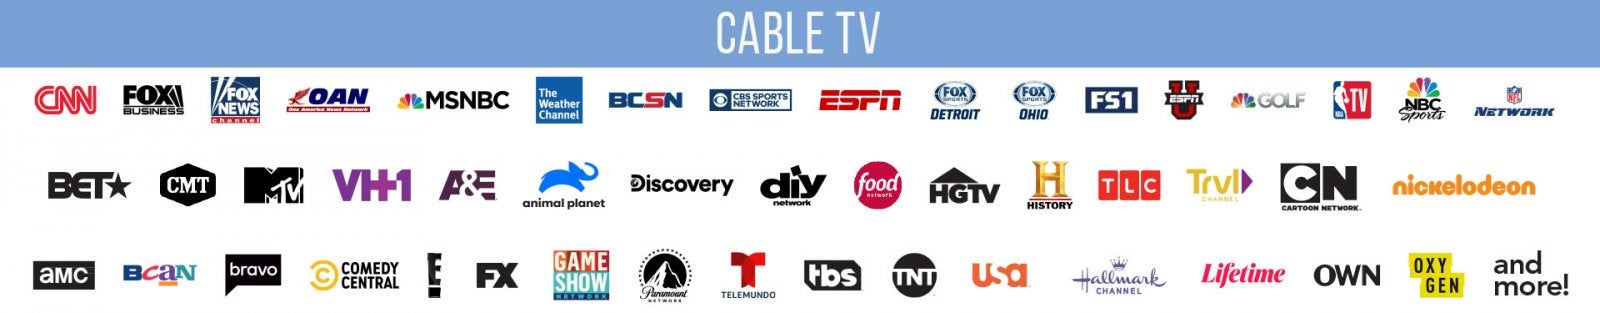 cable networks 